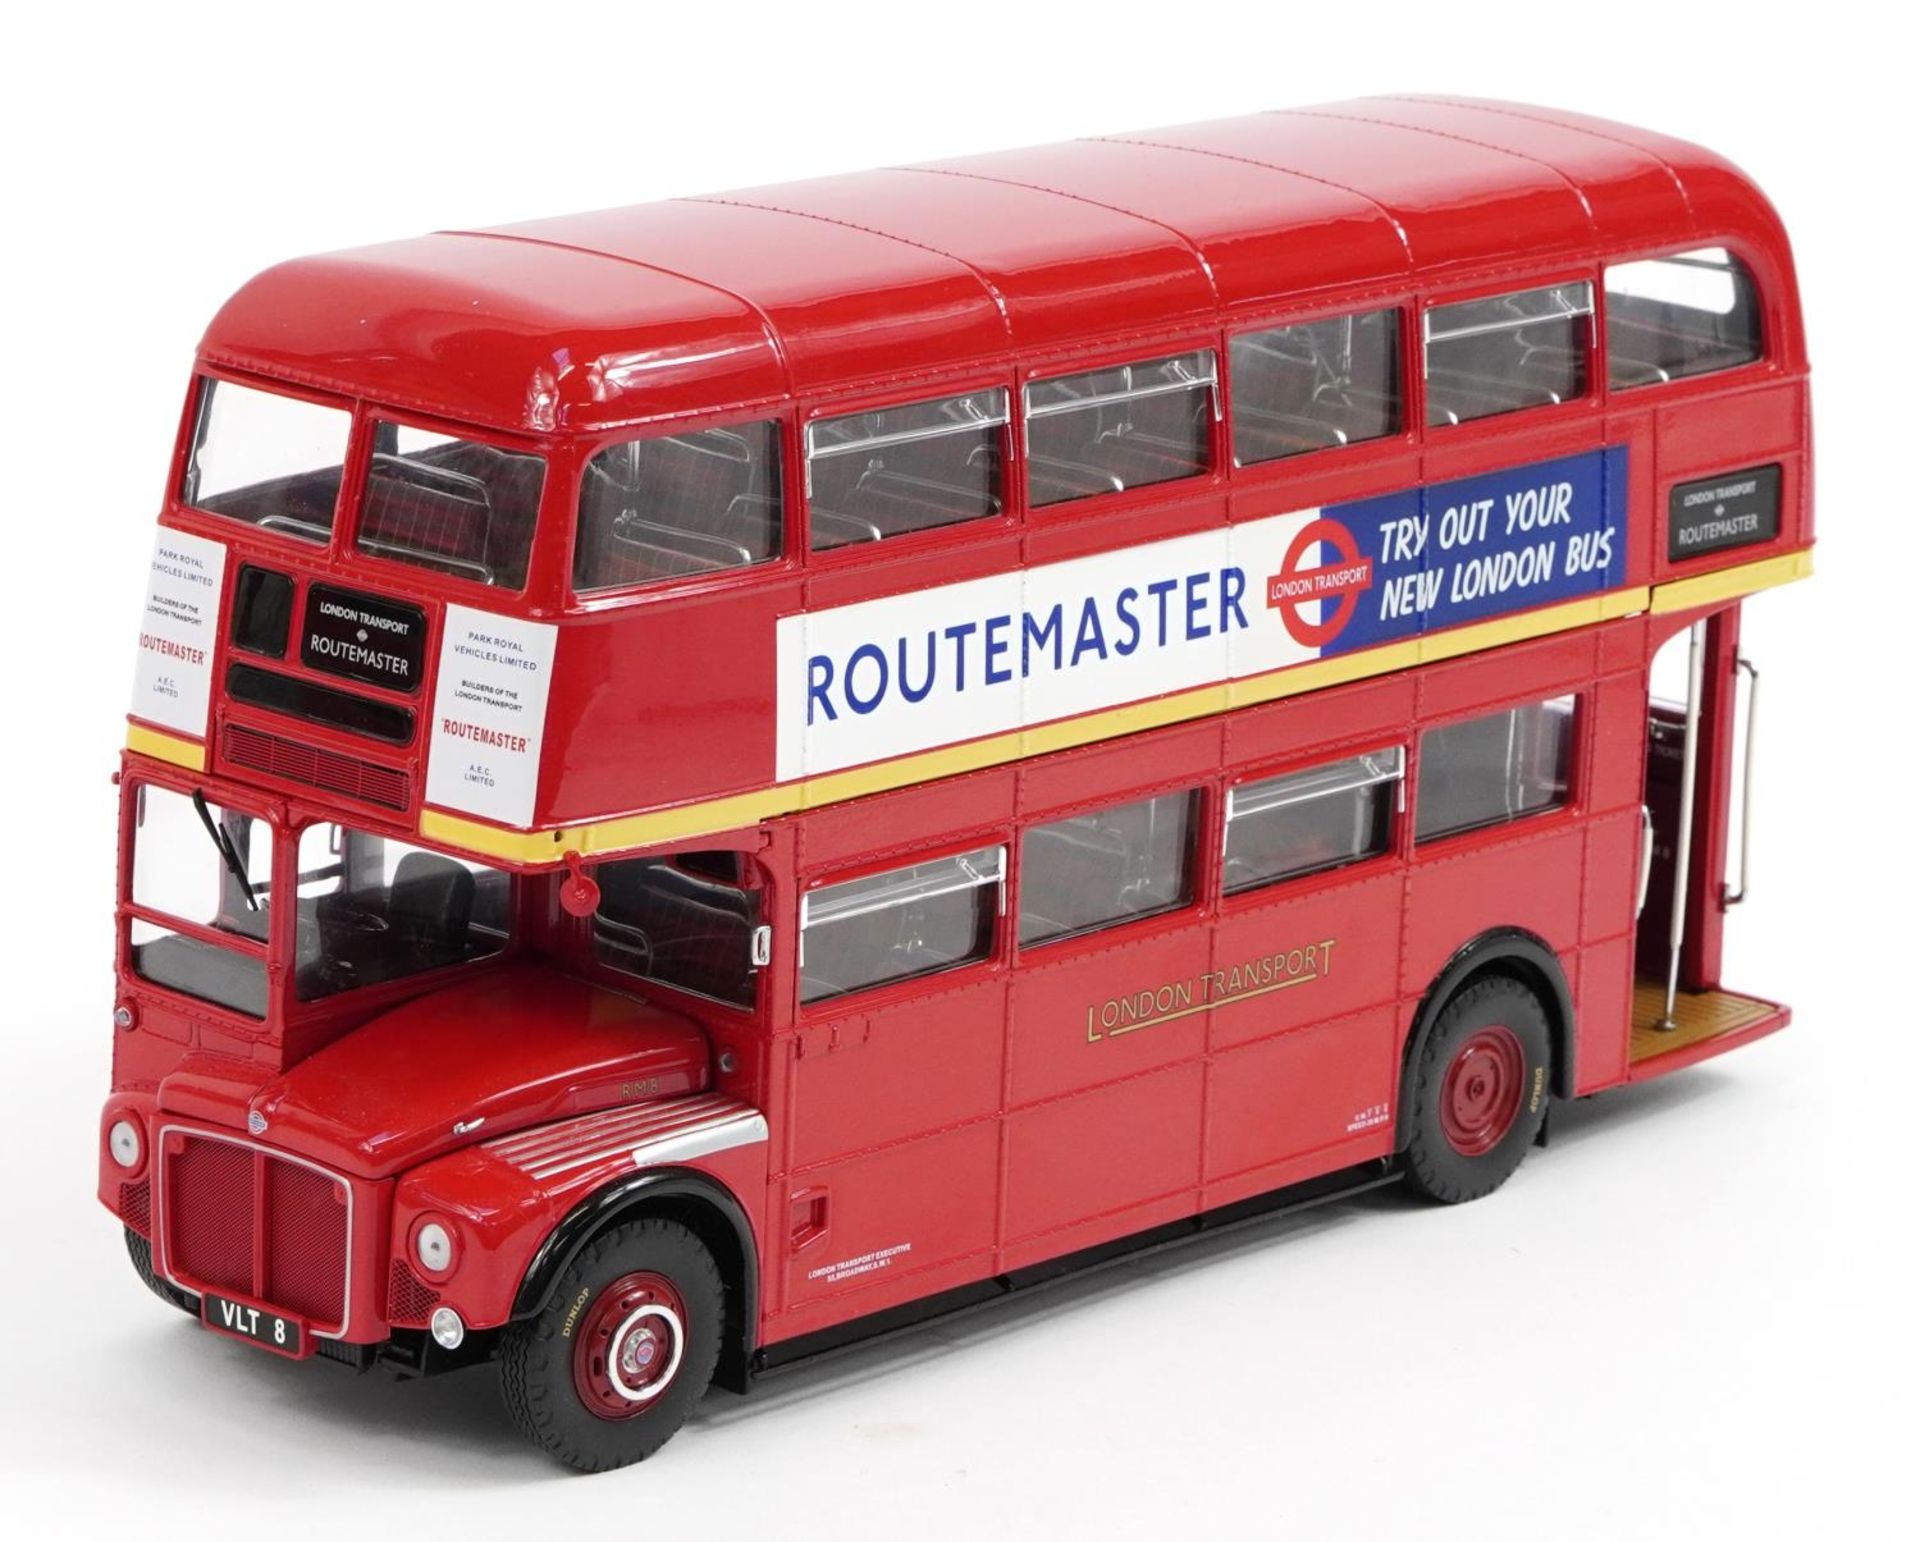 Sun Star Routemaster diecast VM8-VLT Routemaster bus with box, scale1:24 - Image 2 of 4